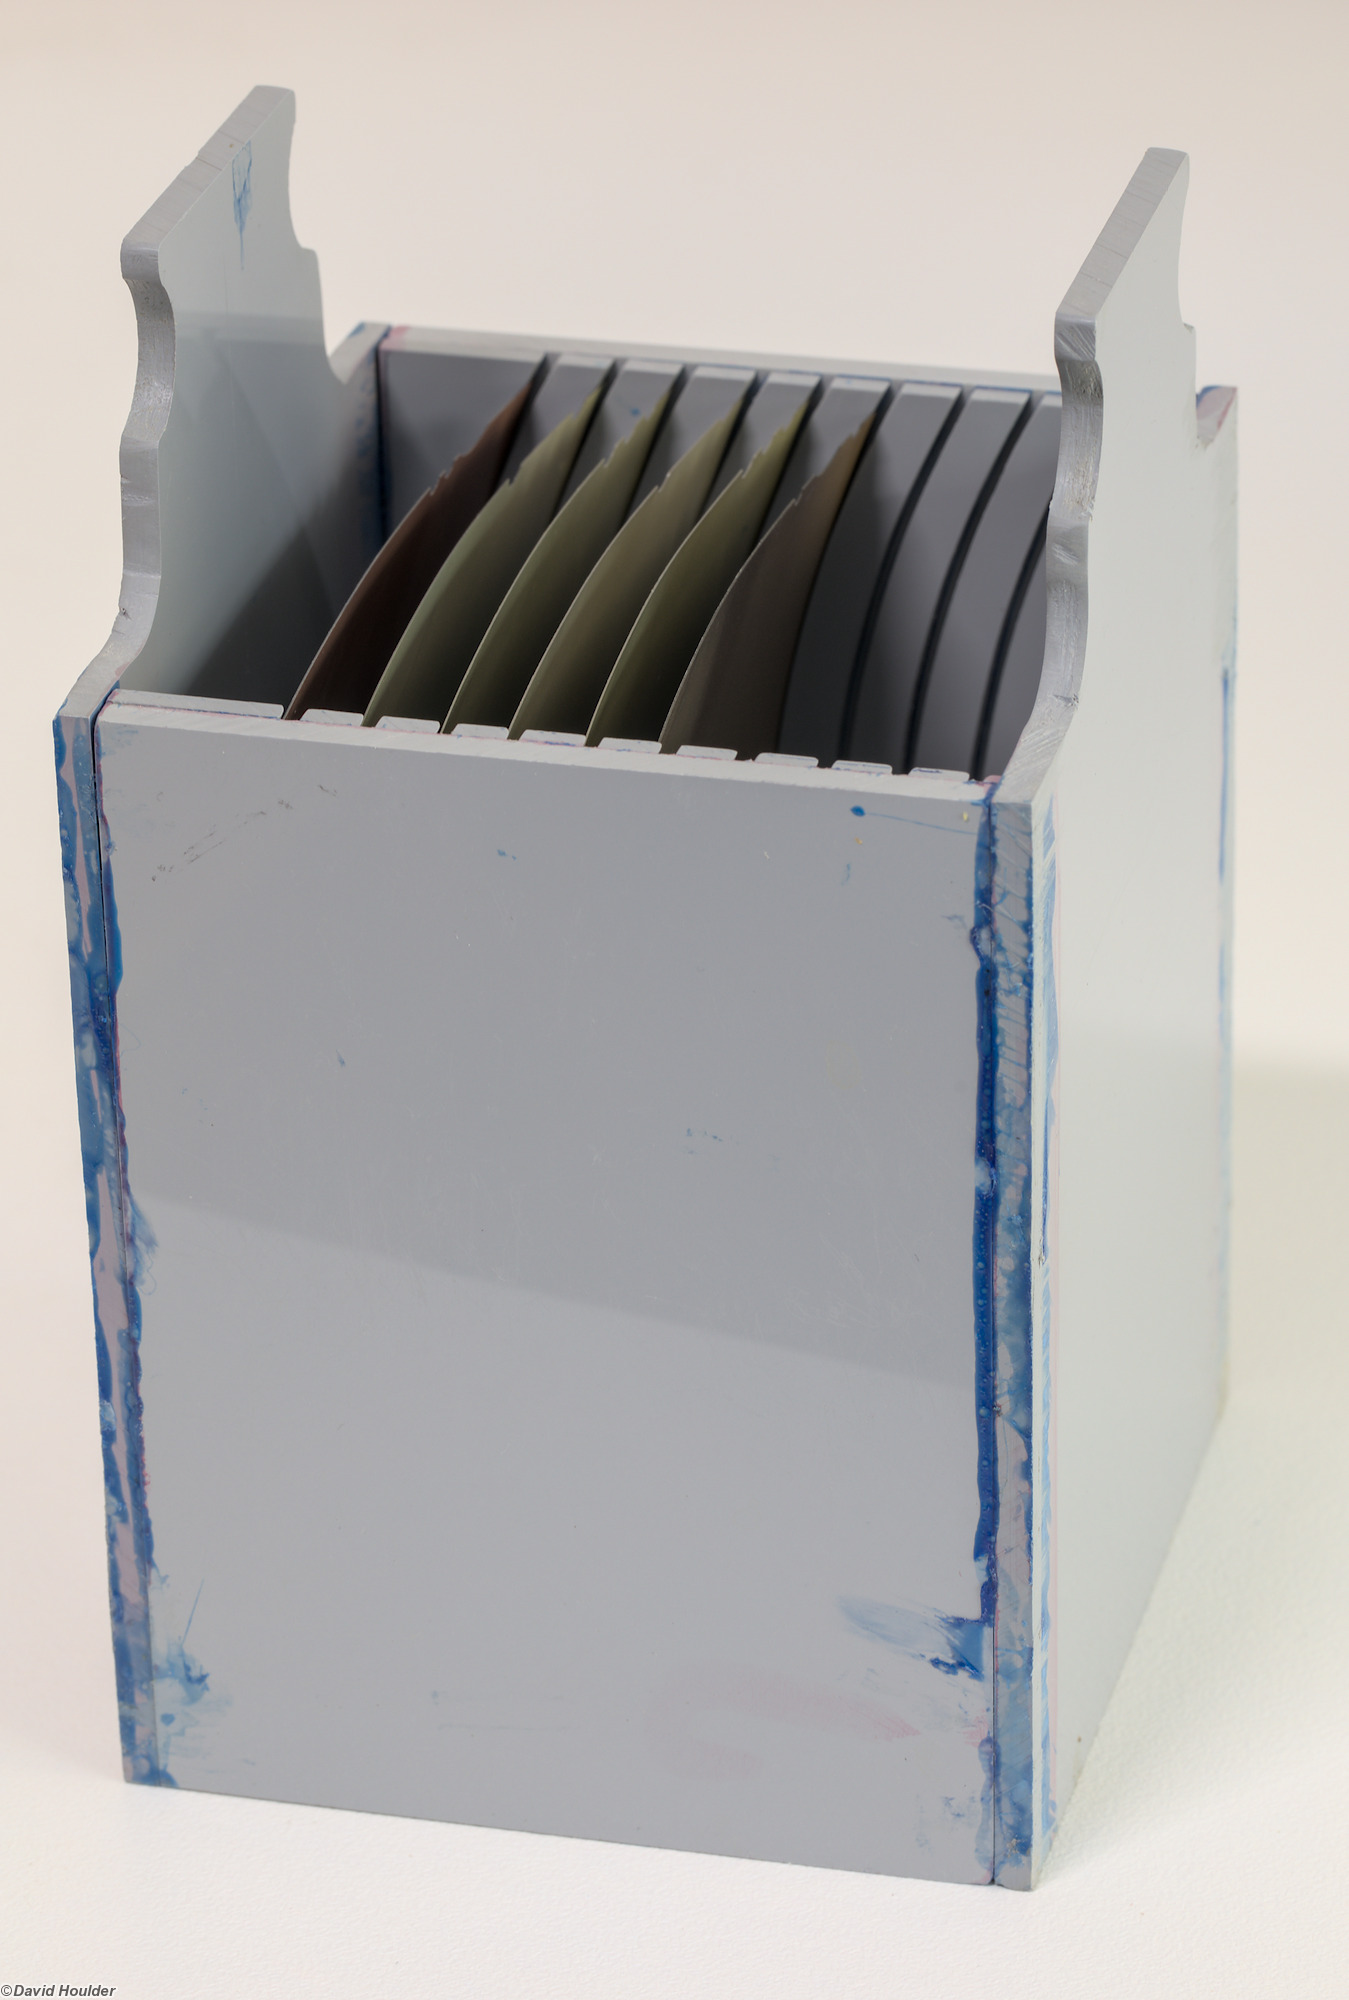 Film carrier loaded with sheet film